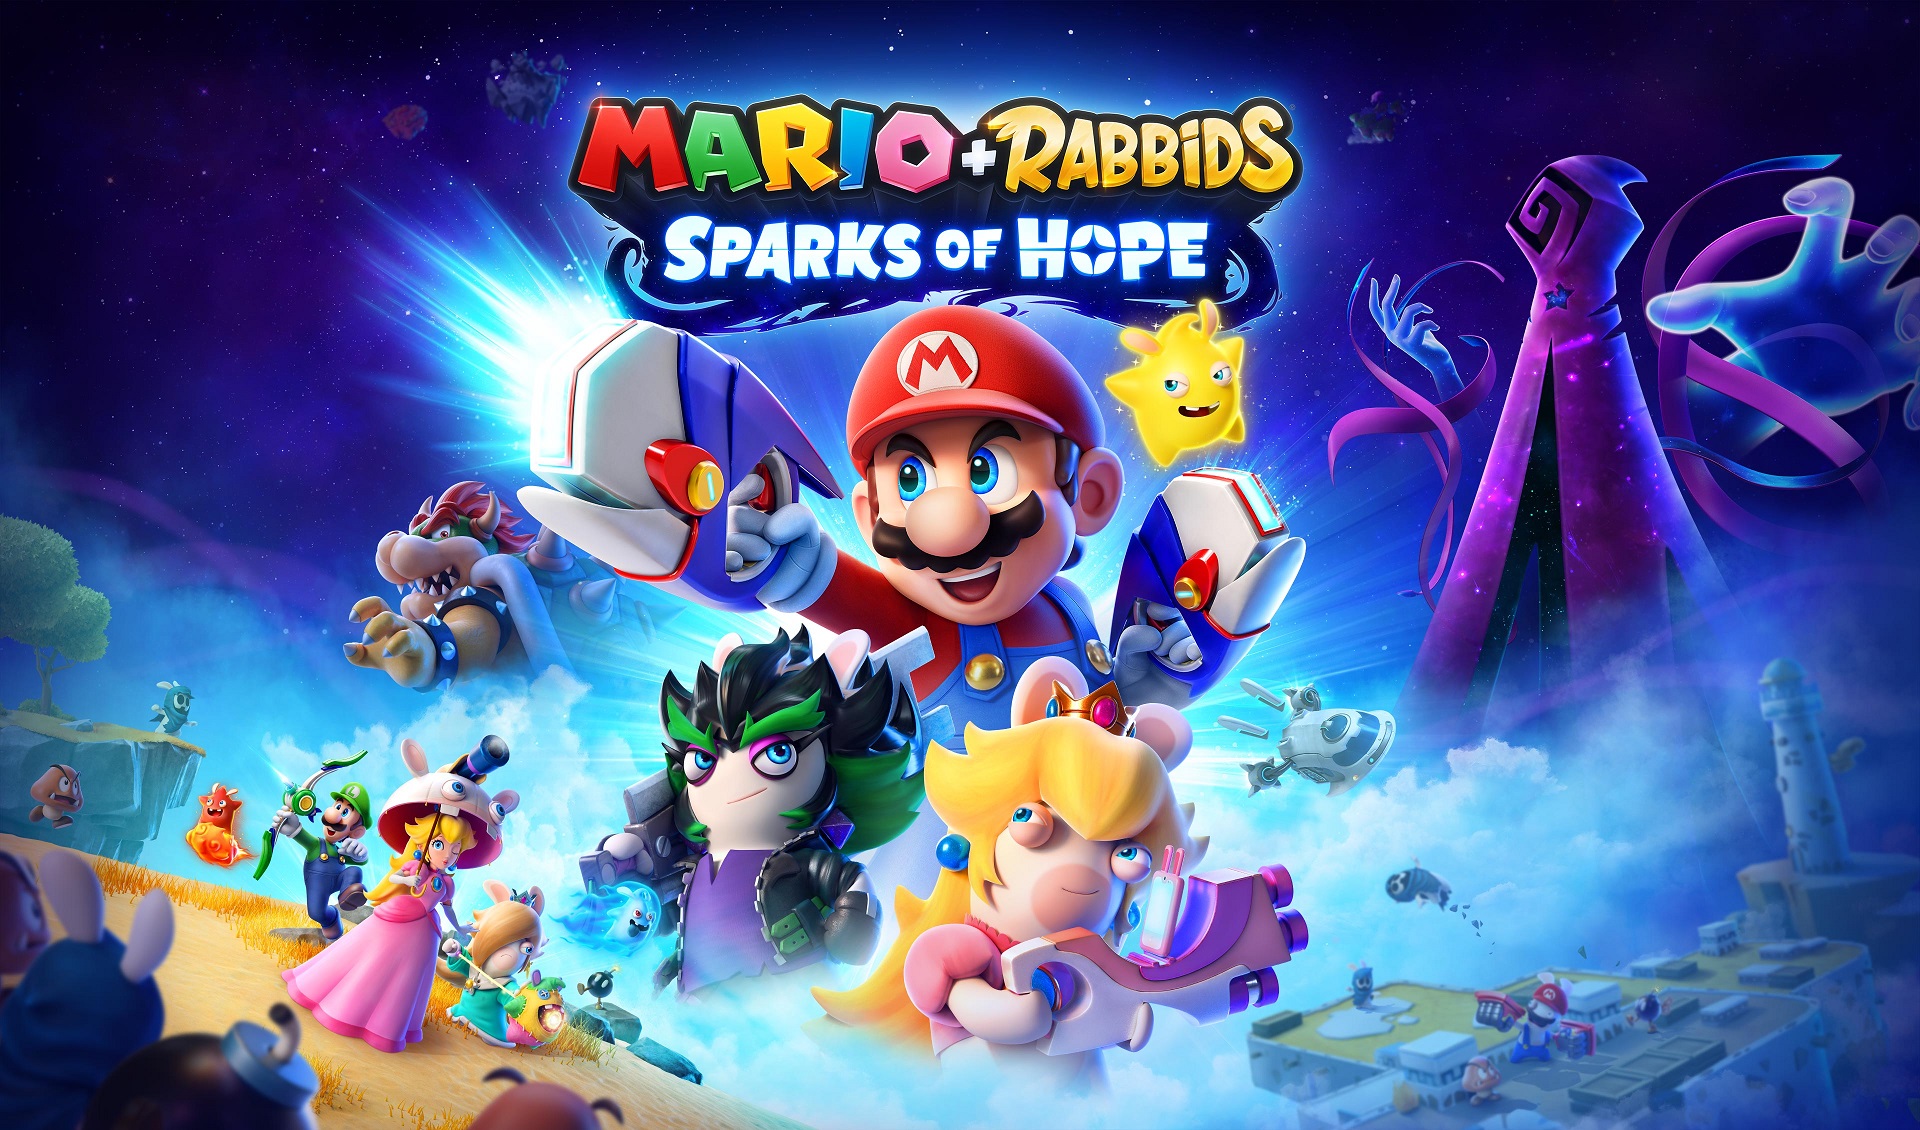 Mario + Rabbids Sparks of Hope goes intergalactic this October